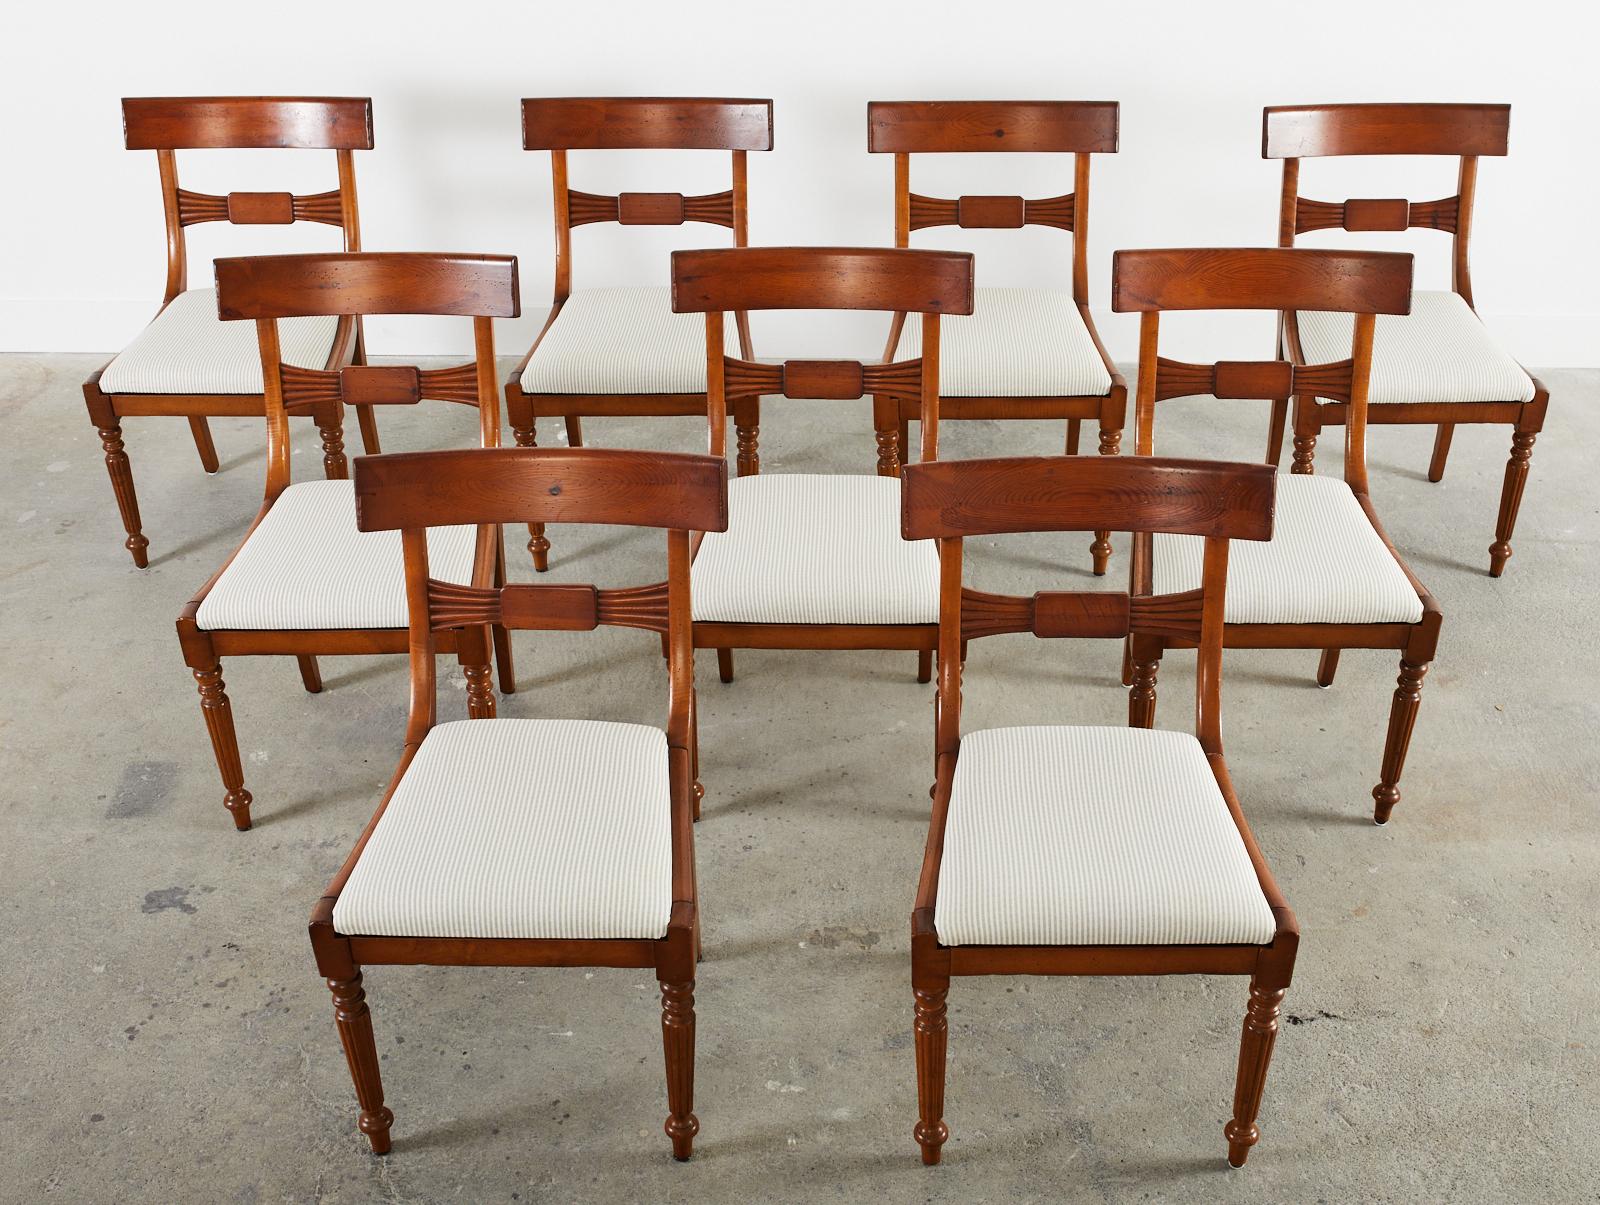 Hand-Crafted Set of Nine Italian Regency Dining Chairs by Baker Milling Road